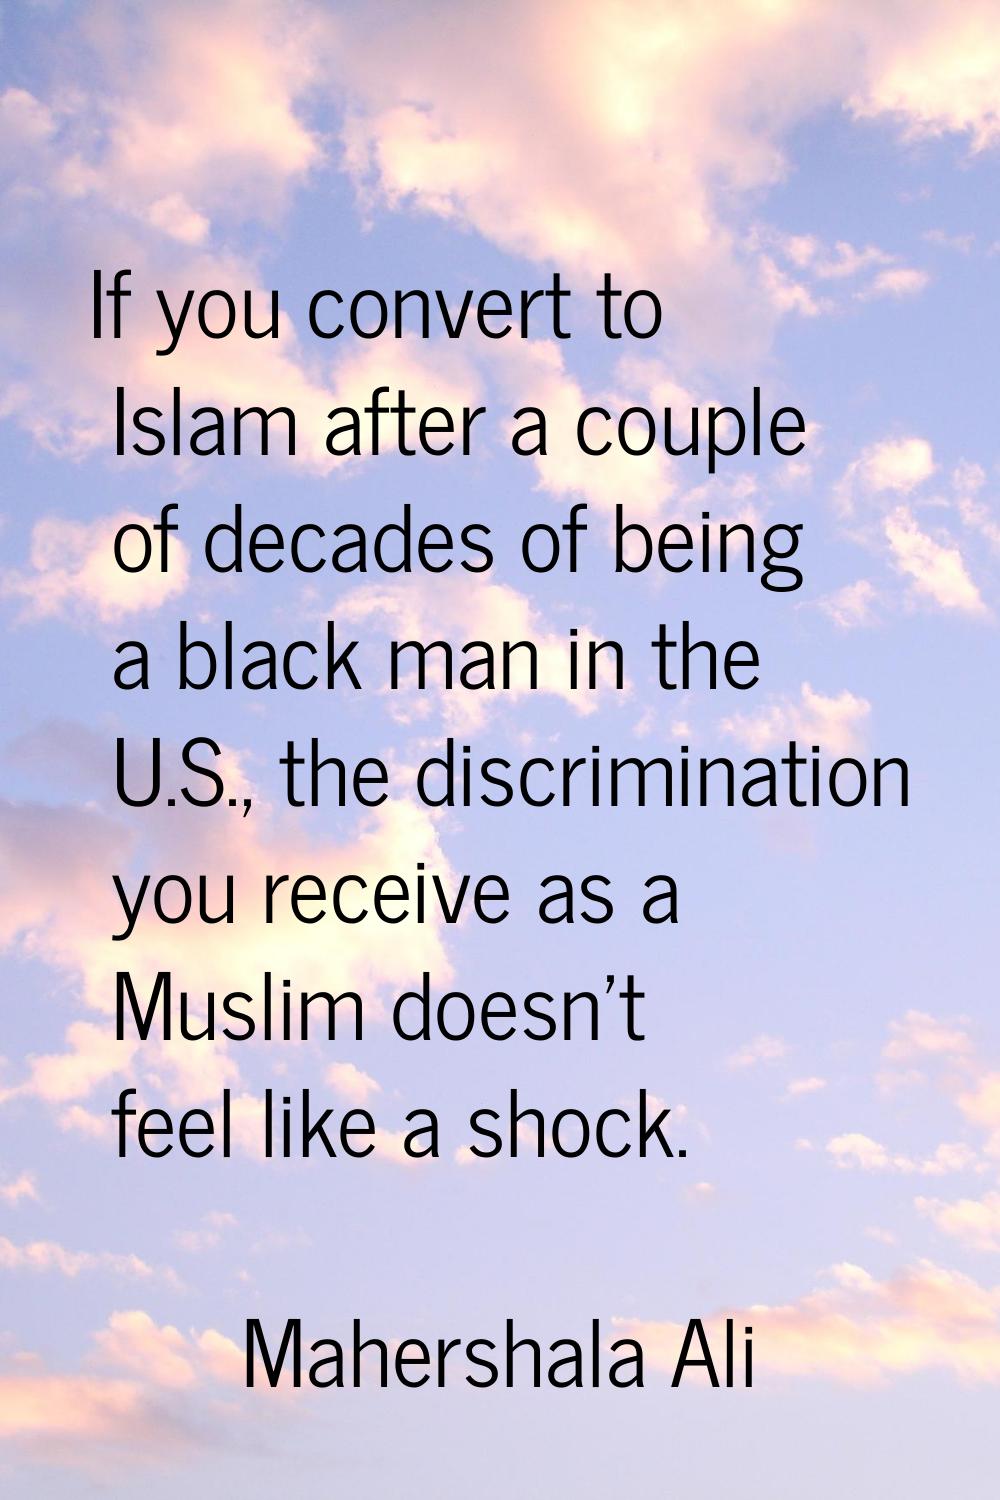 If you convert to Islam after a couple of decades of being a black man in the U.S., the discriminat